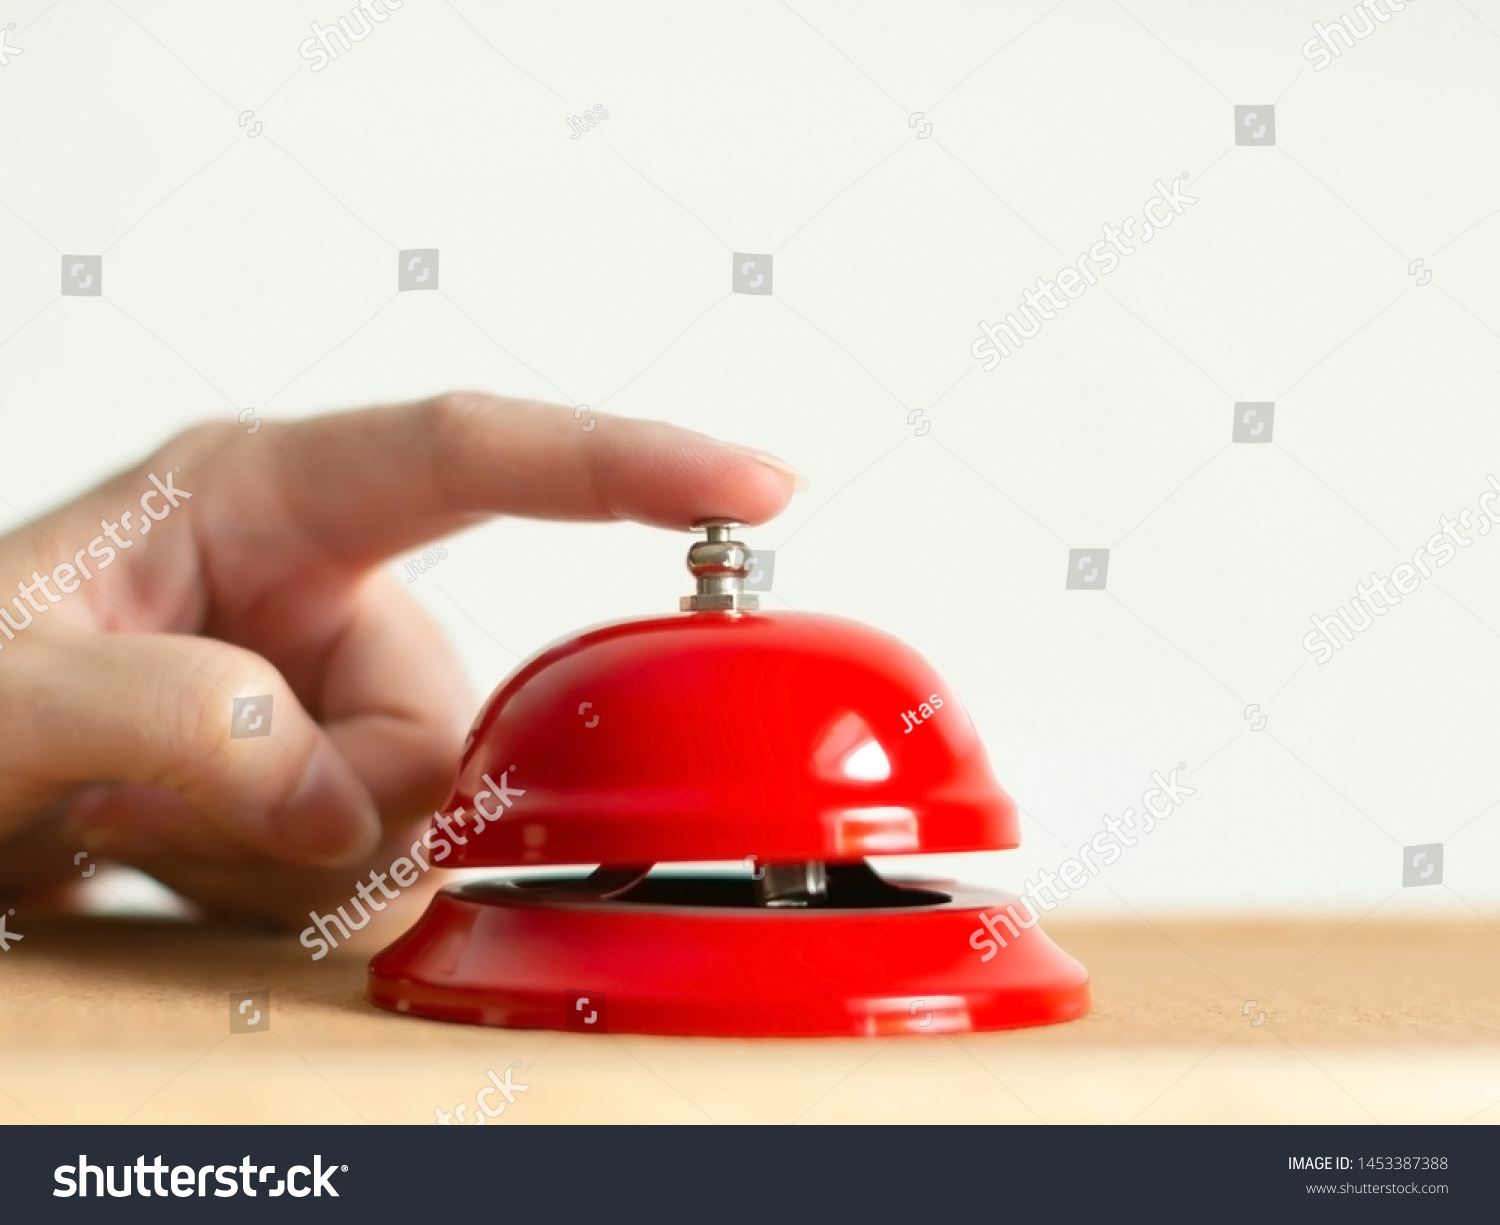 A hand press the red handbell on wooden table on white background; selected focus at the index finger that pressing the bell button. concept of calling for assistance. #1453387388